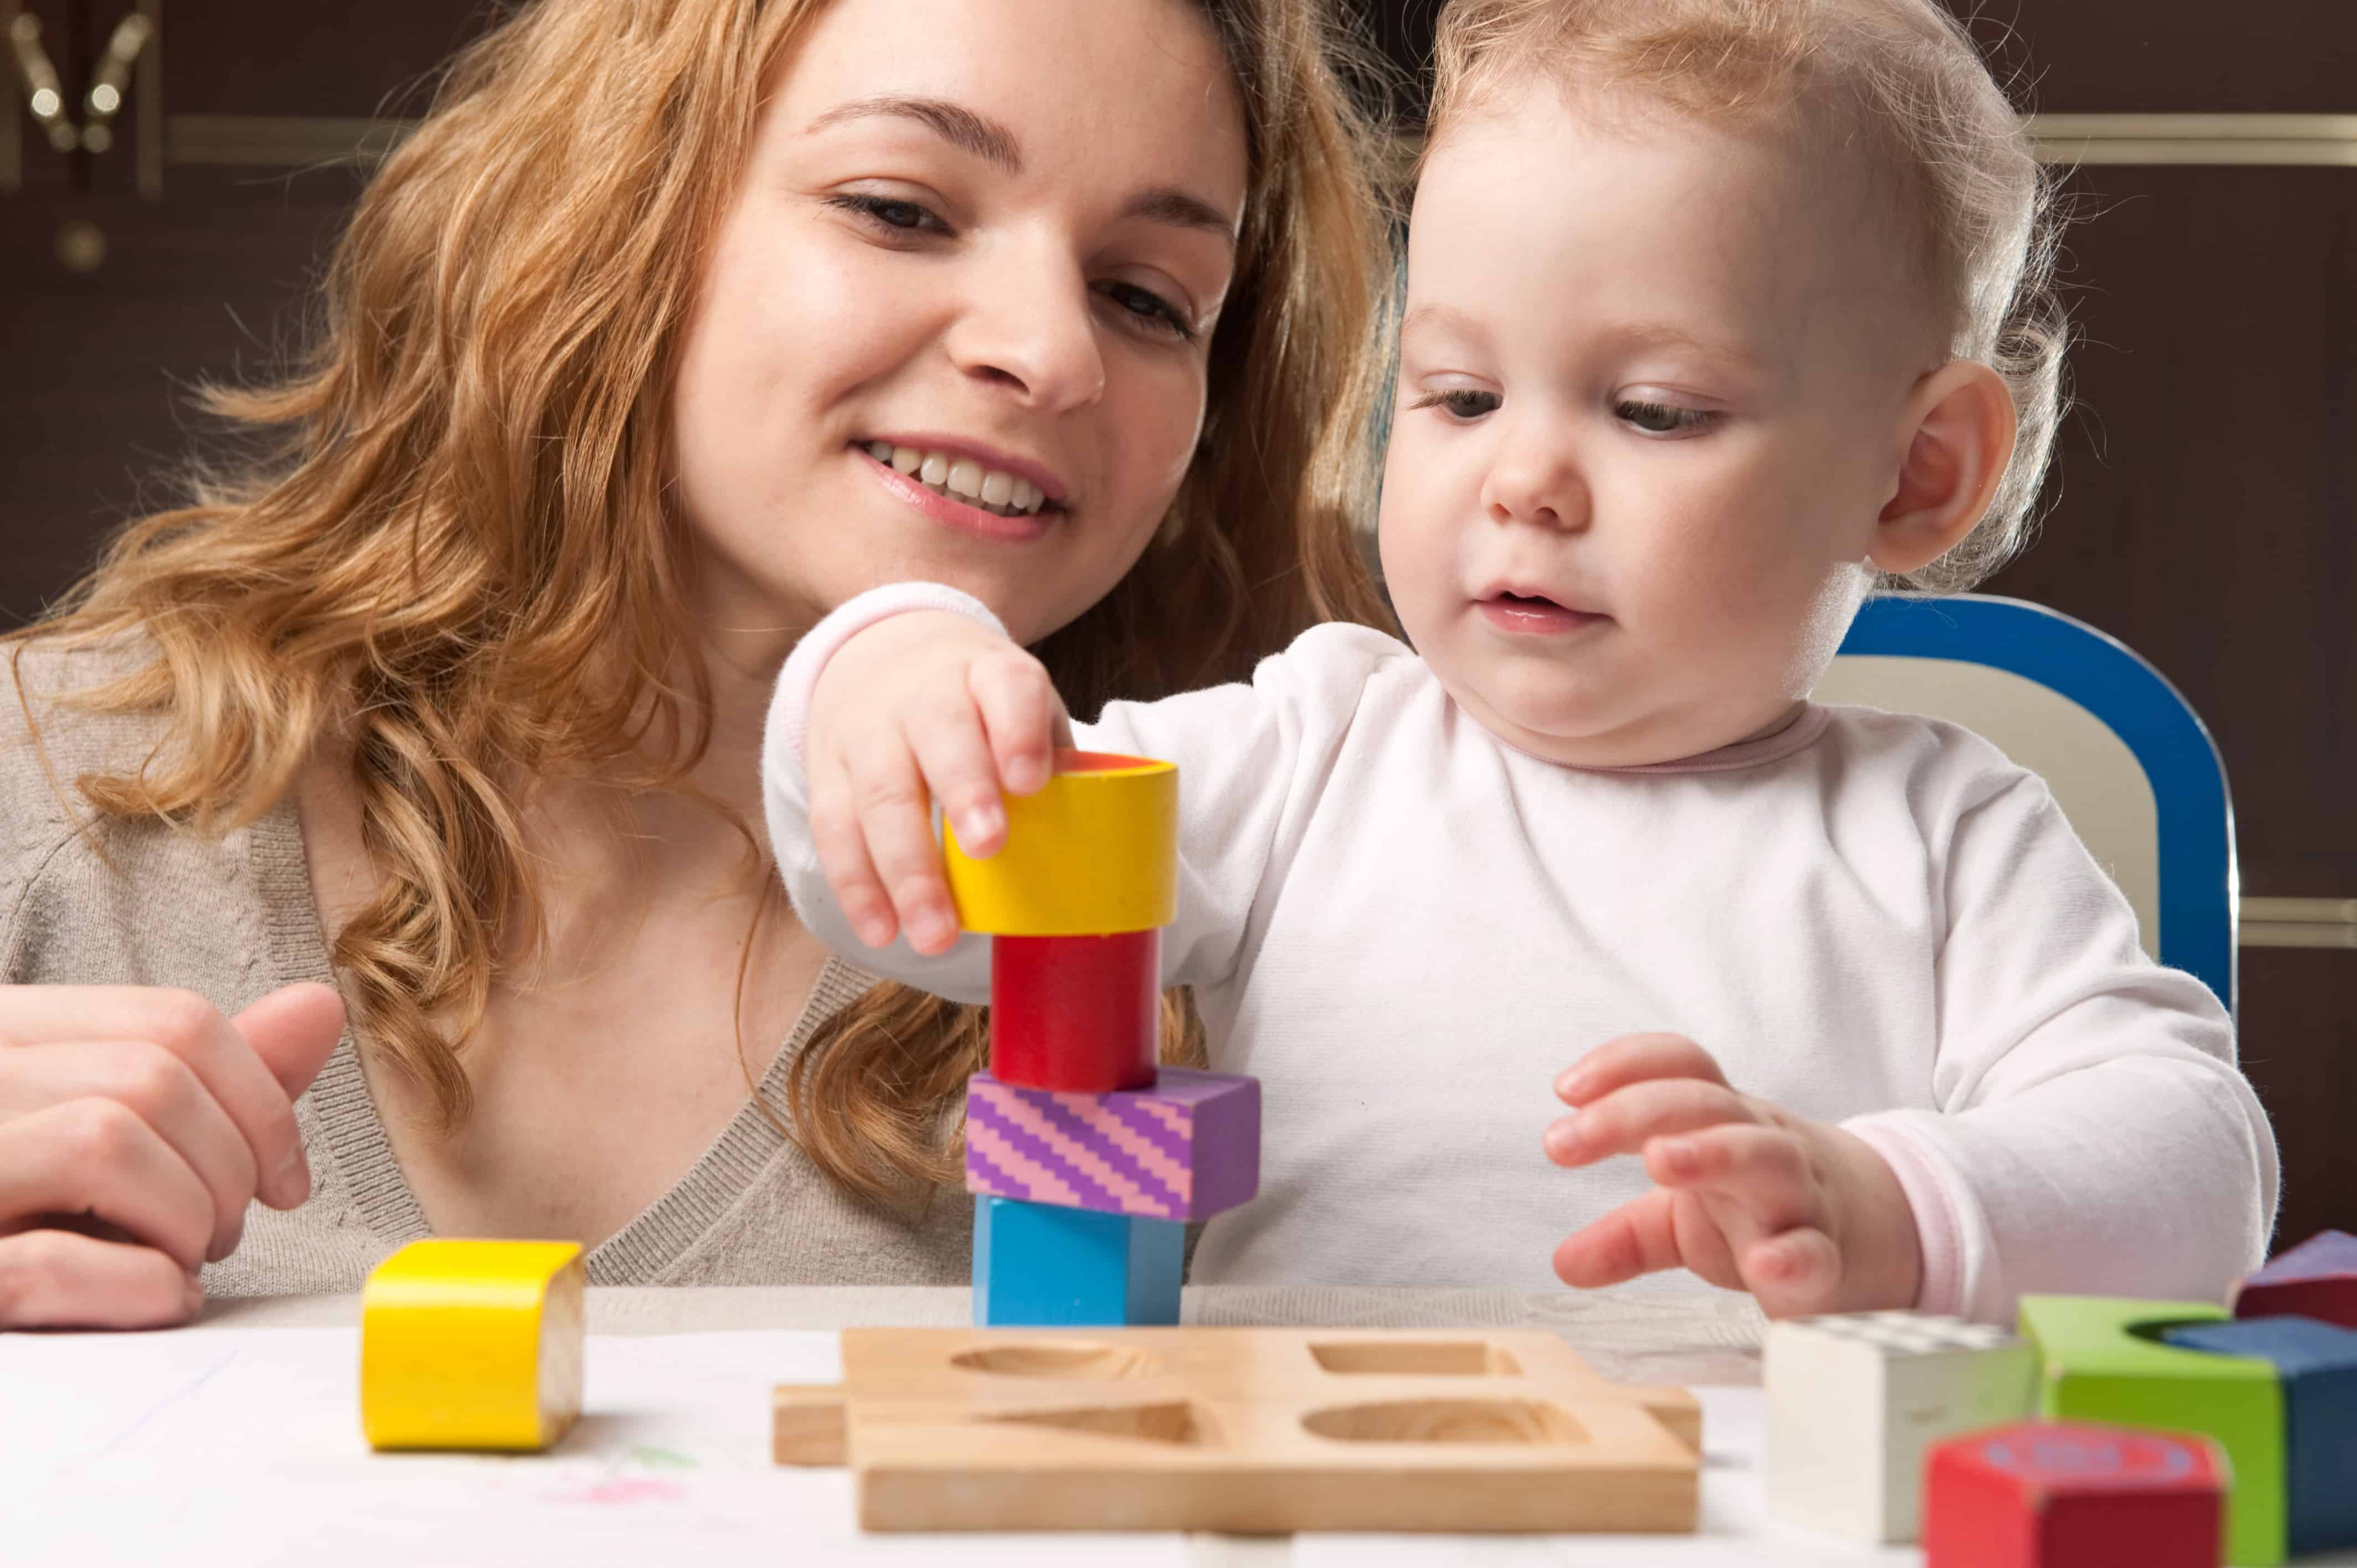 Are you looking for the perfect gift for the baby in your life? Use these simple tips to select toys that will encourage your baby's development and won't break the bank. Shopping for infants made easy!